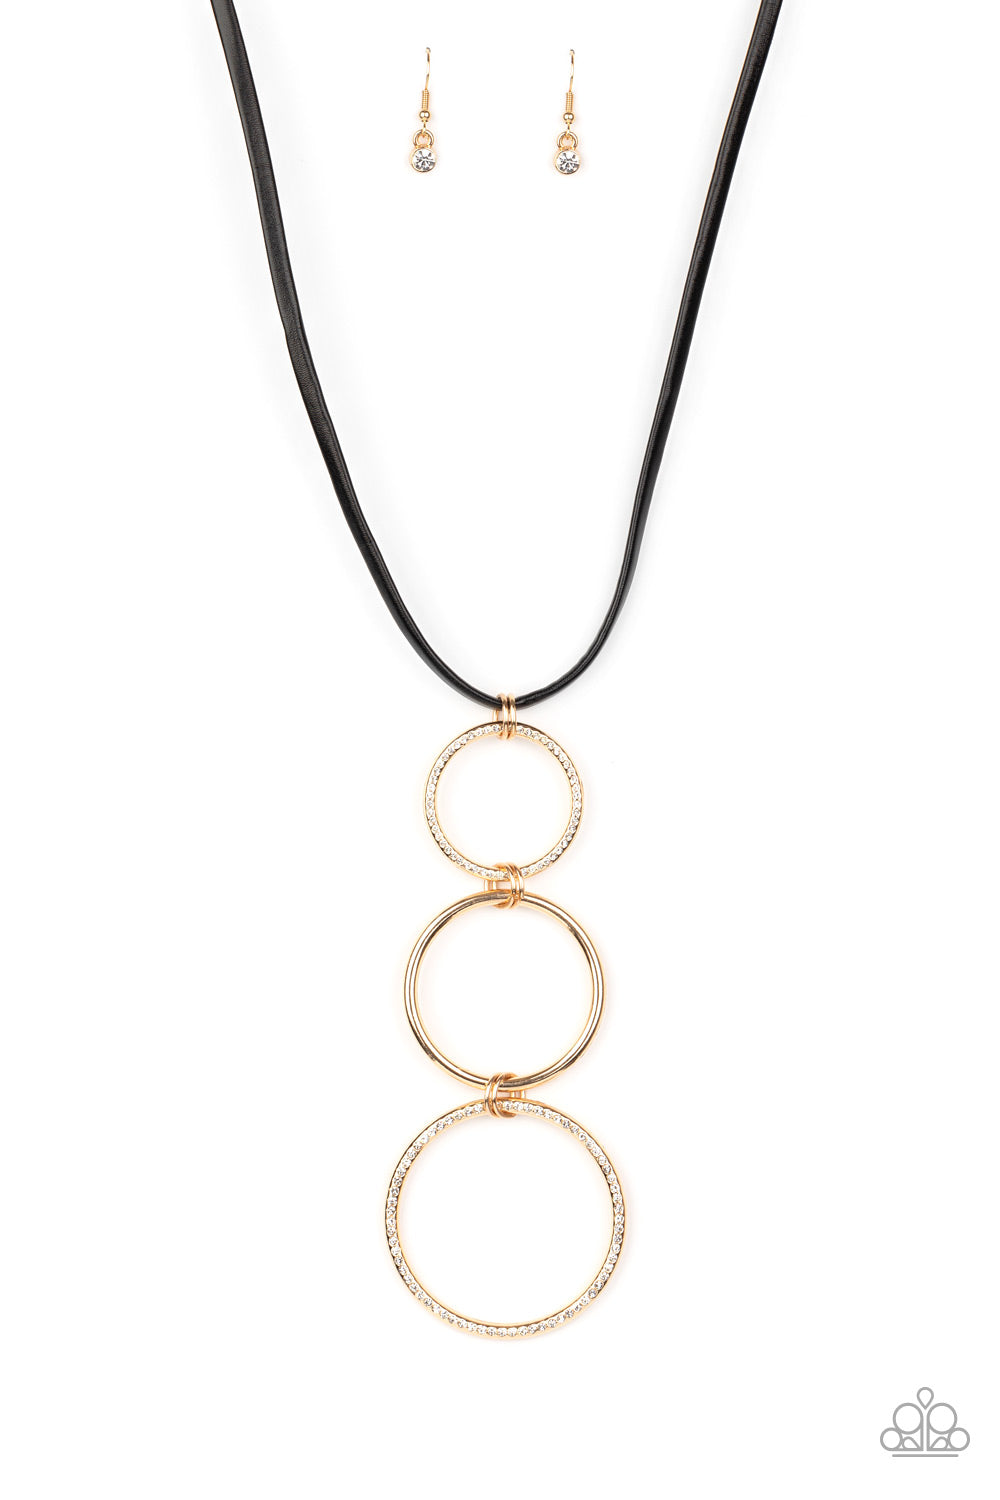 CURVY COUTURE - GOLD NECKLACE